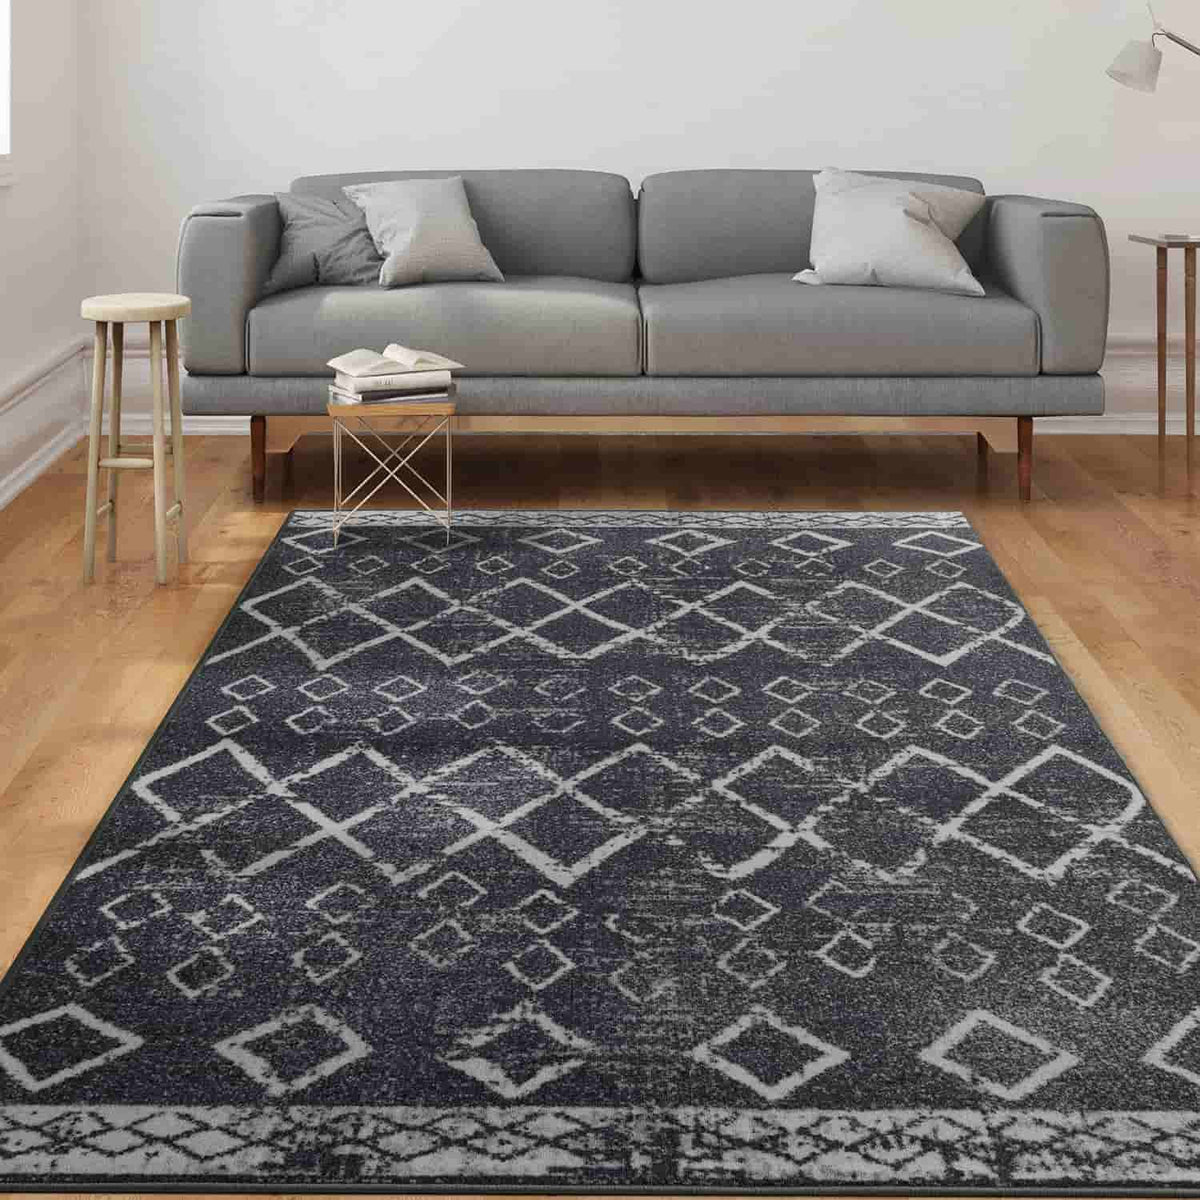 Moroccan Trellis Rug 3x5 White Throw Rugs with Rubber Backing